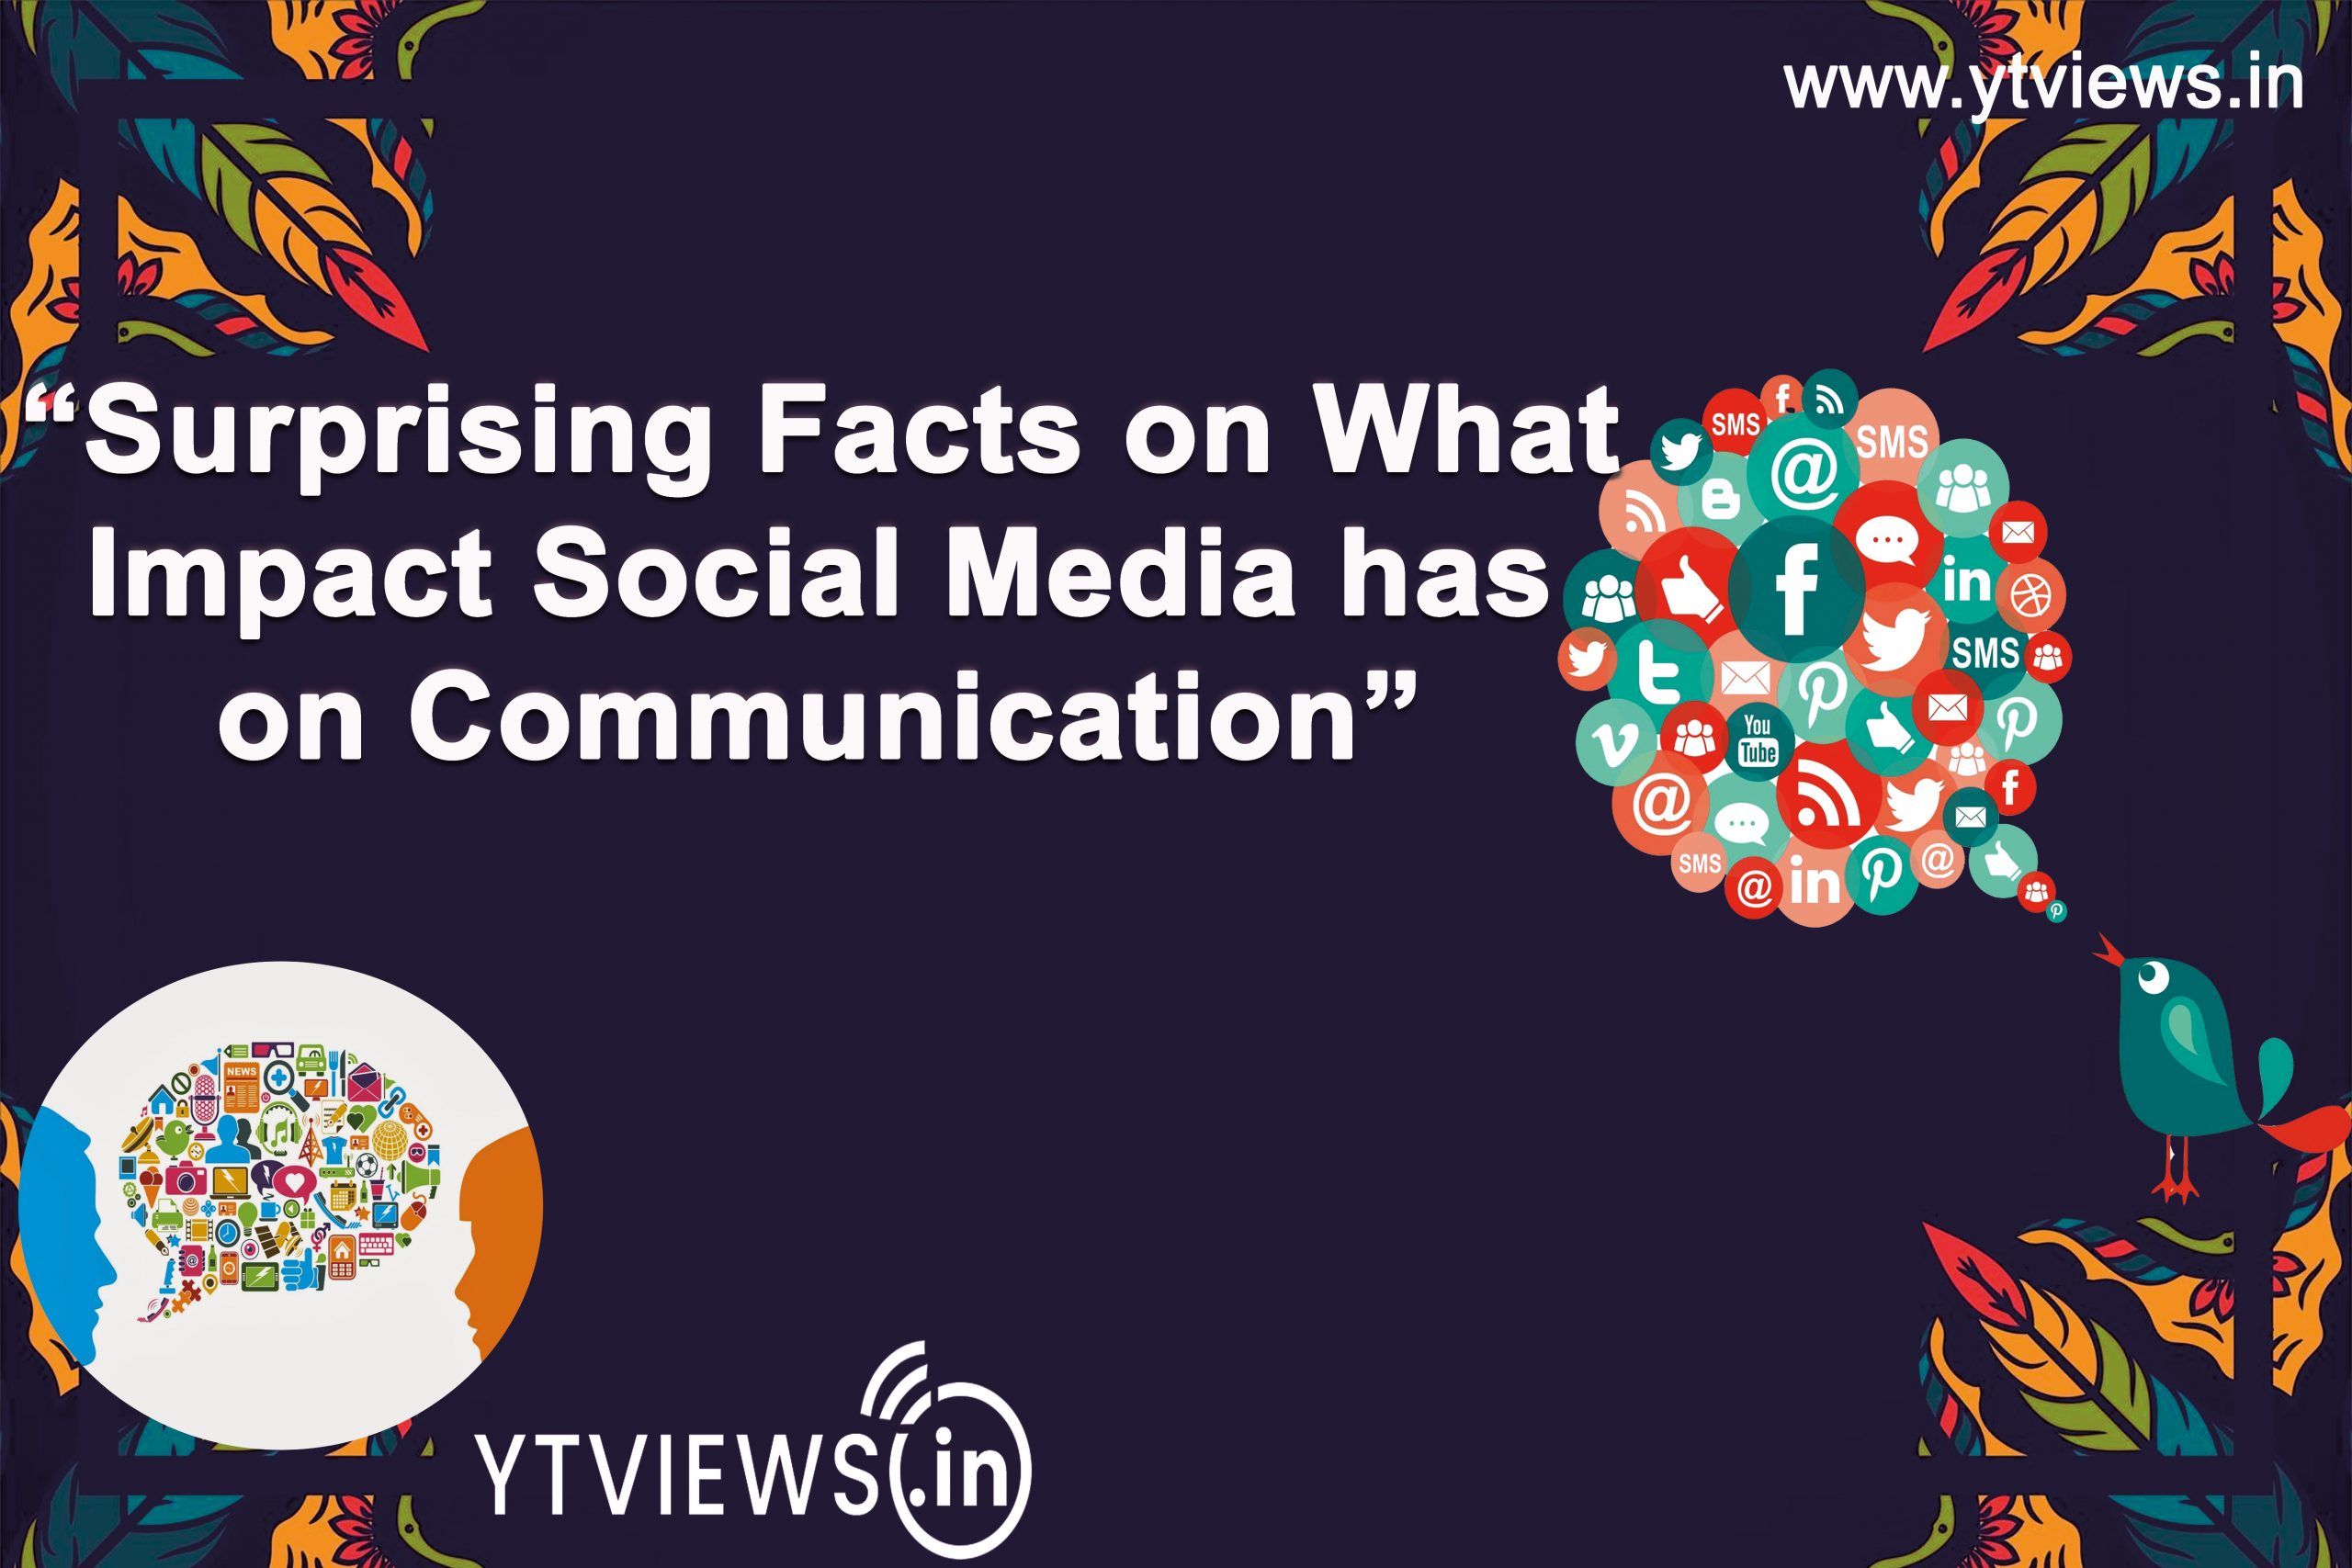 Surprising facts on What Impact Social Media has on Communication